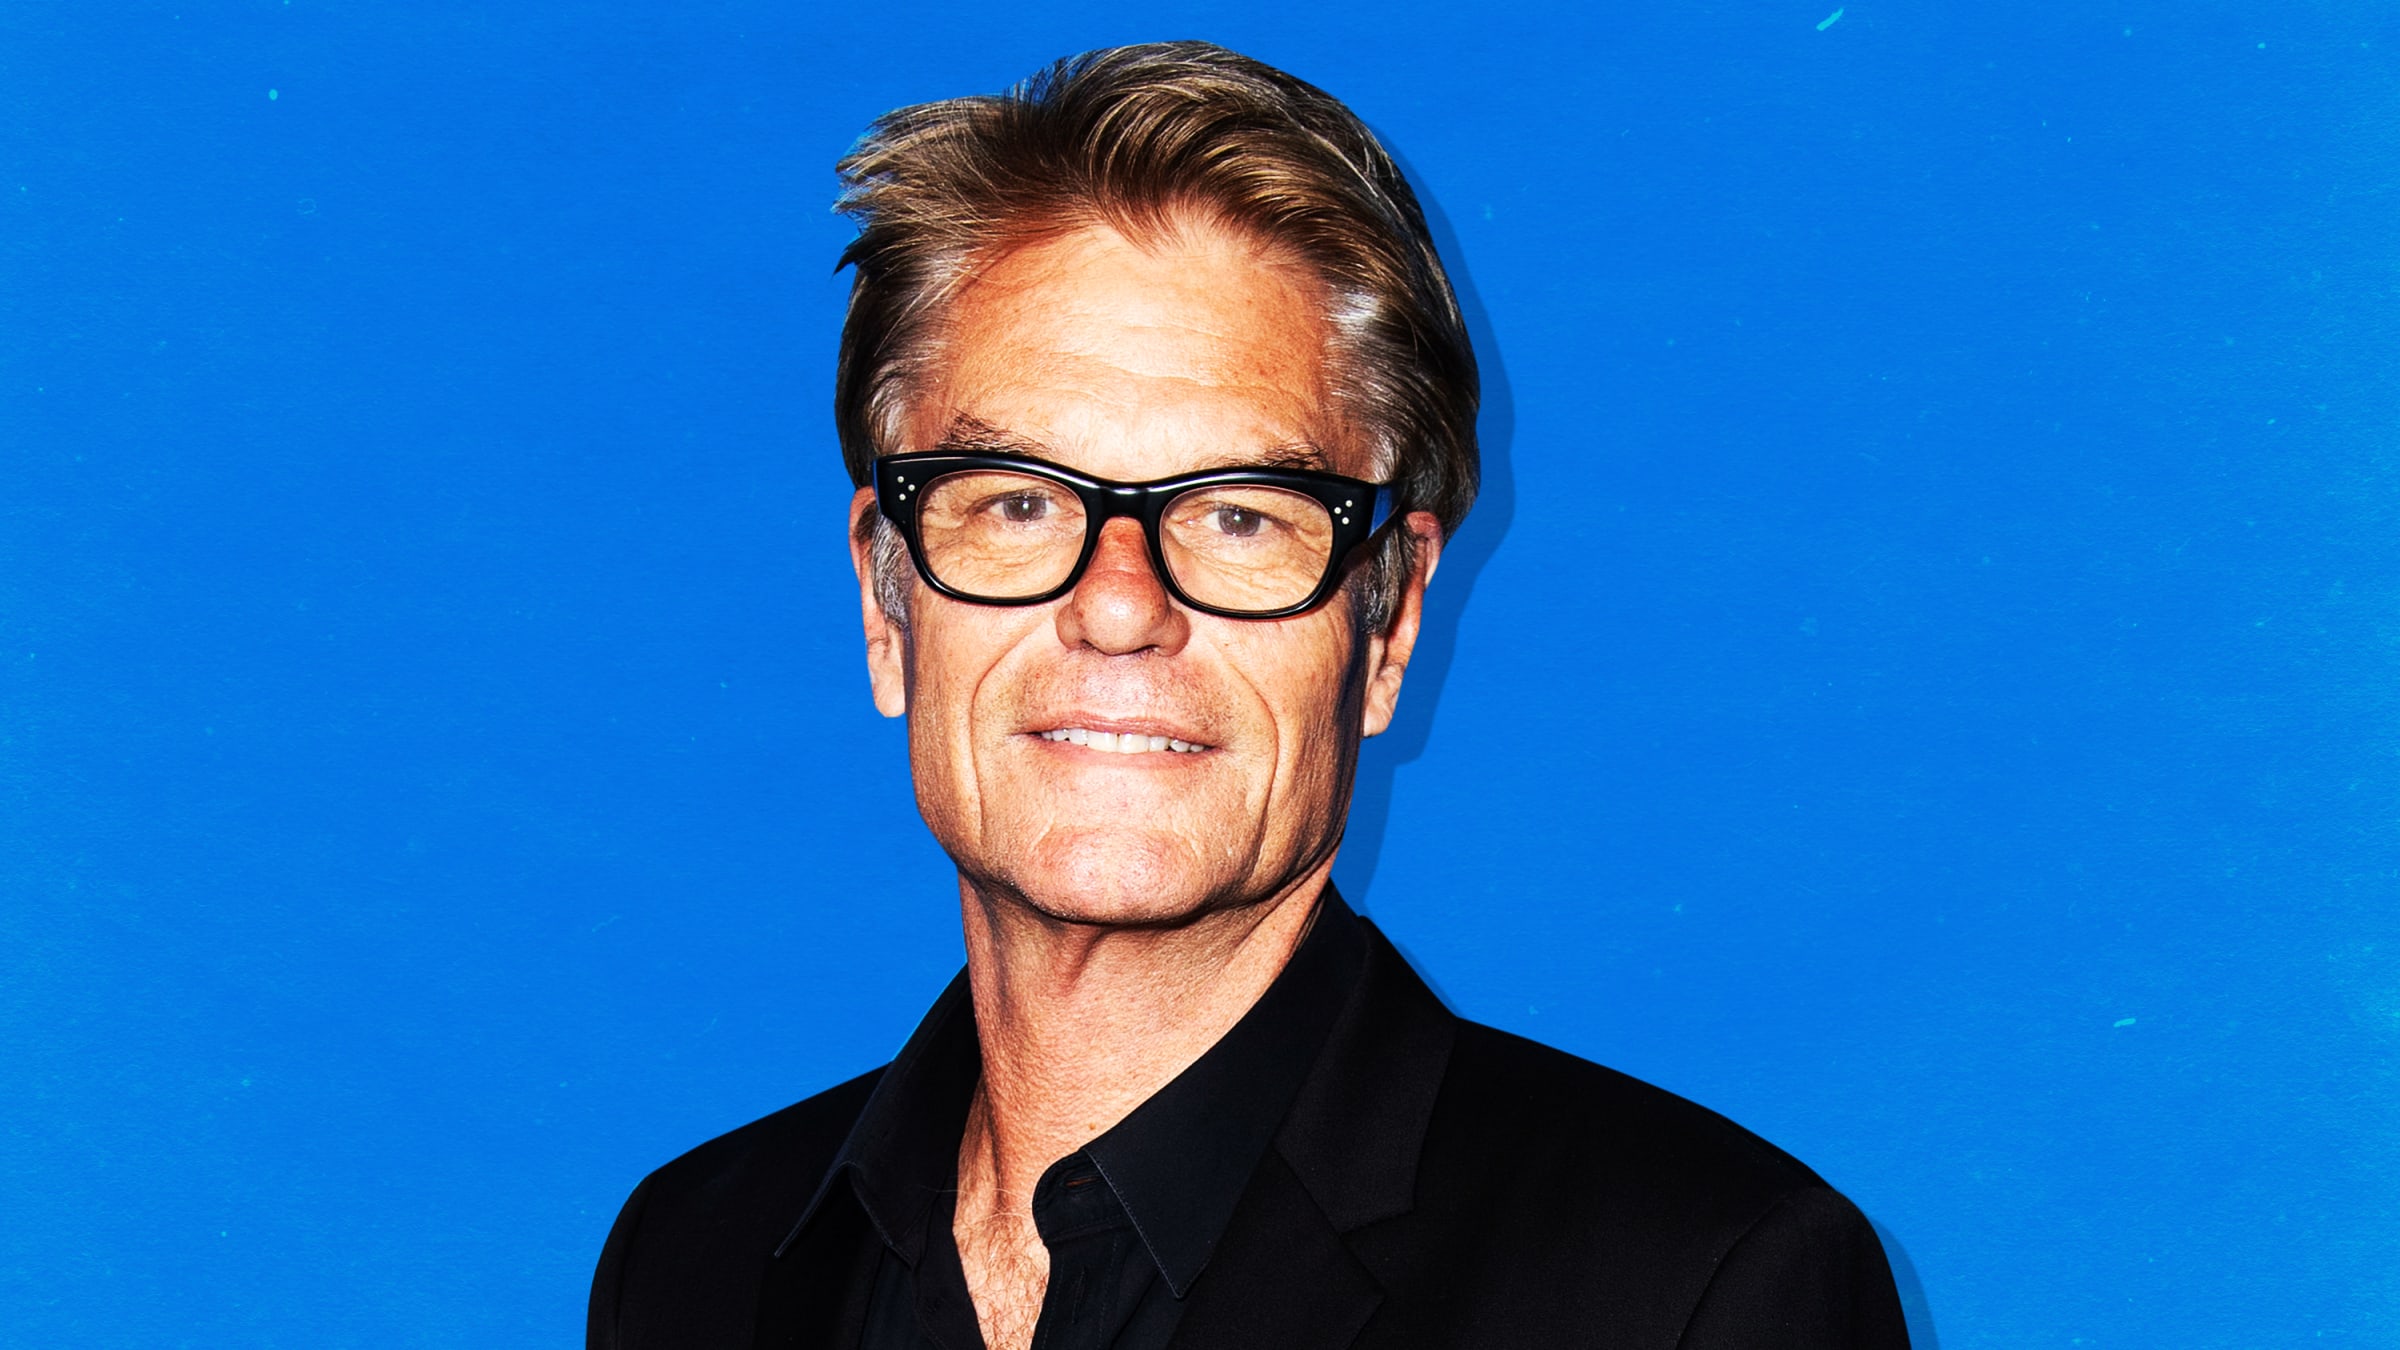 The Wild Life of Harry Hamlin, the Real Housewives Husband Whose Divorce Lawyer Is on Speed Dial pic